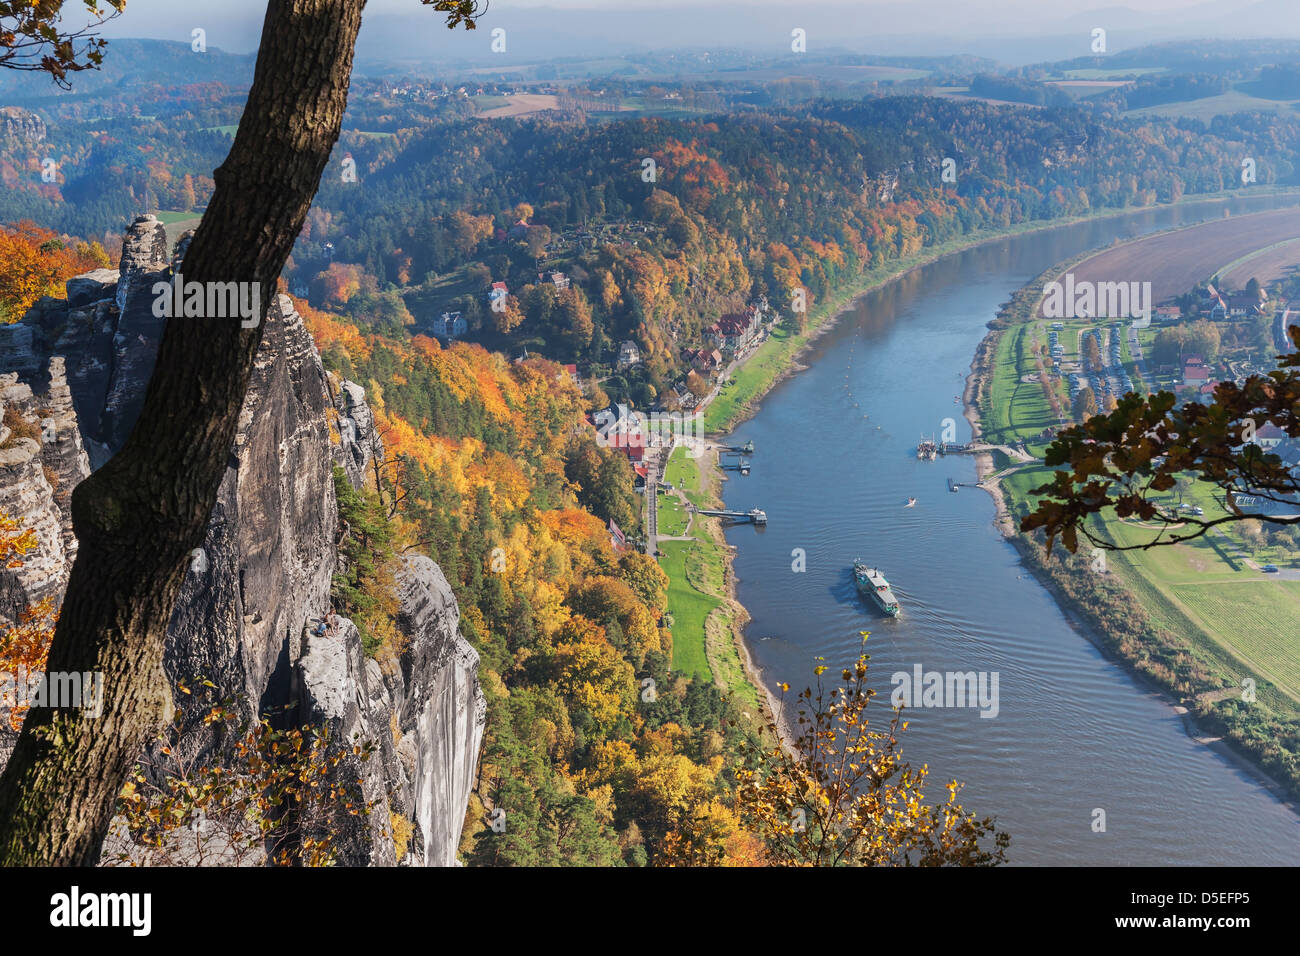 View from the rock formation Bastei (Bastion) to health resort Rathen, near Dresden, and the Elbe River, Saxony, Germany, Europe Stock Photo